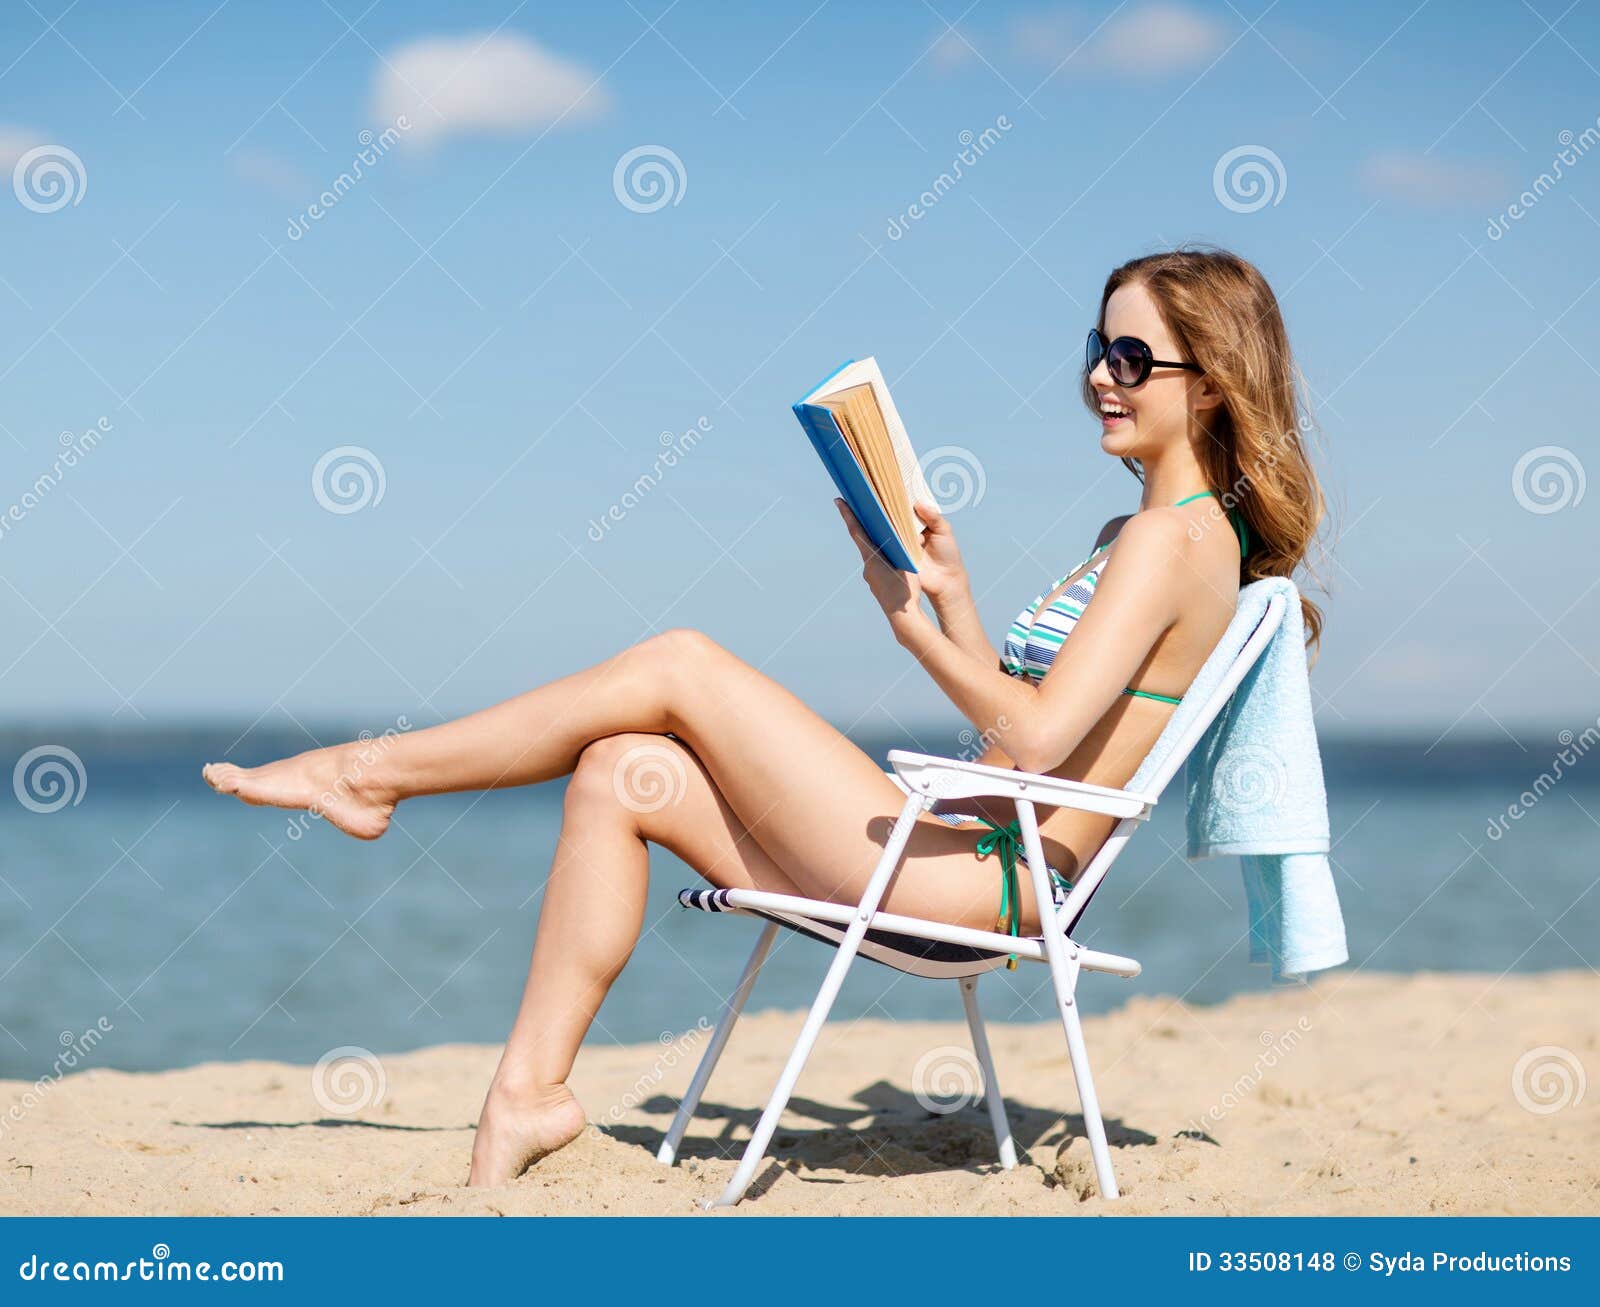 Girl Reading Book On The Beach Chair Stock Photo Image Of Female